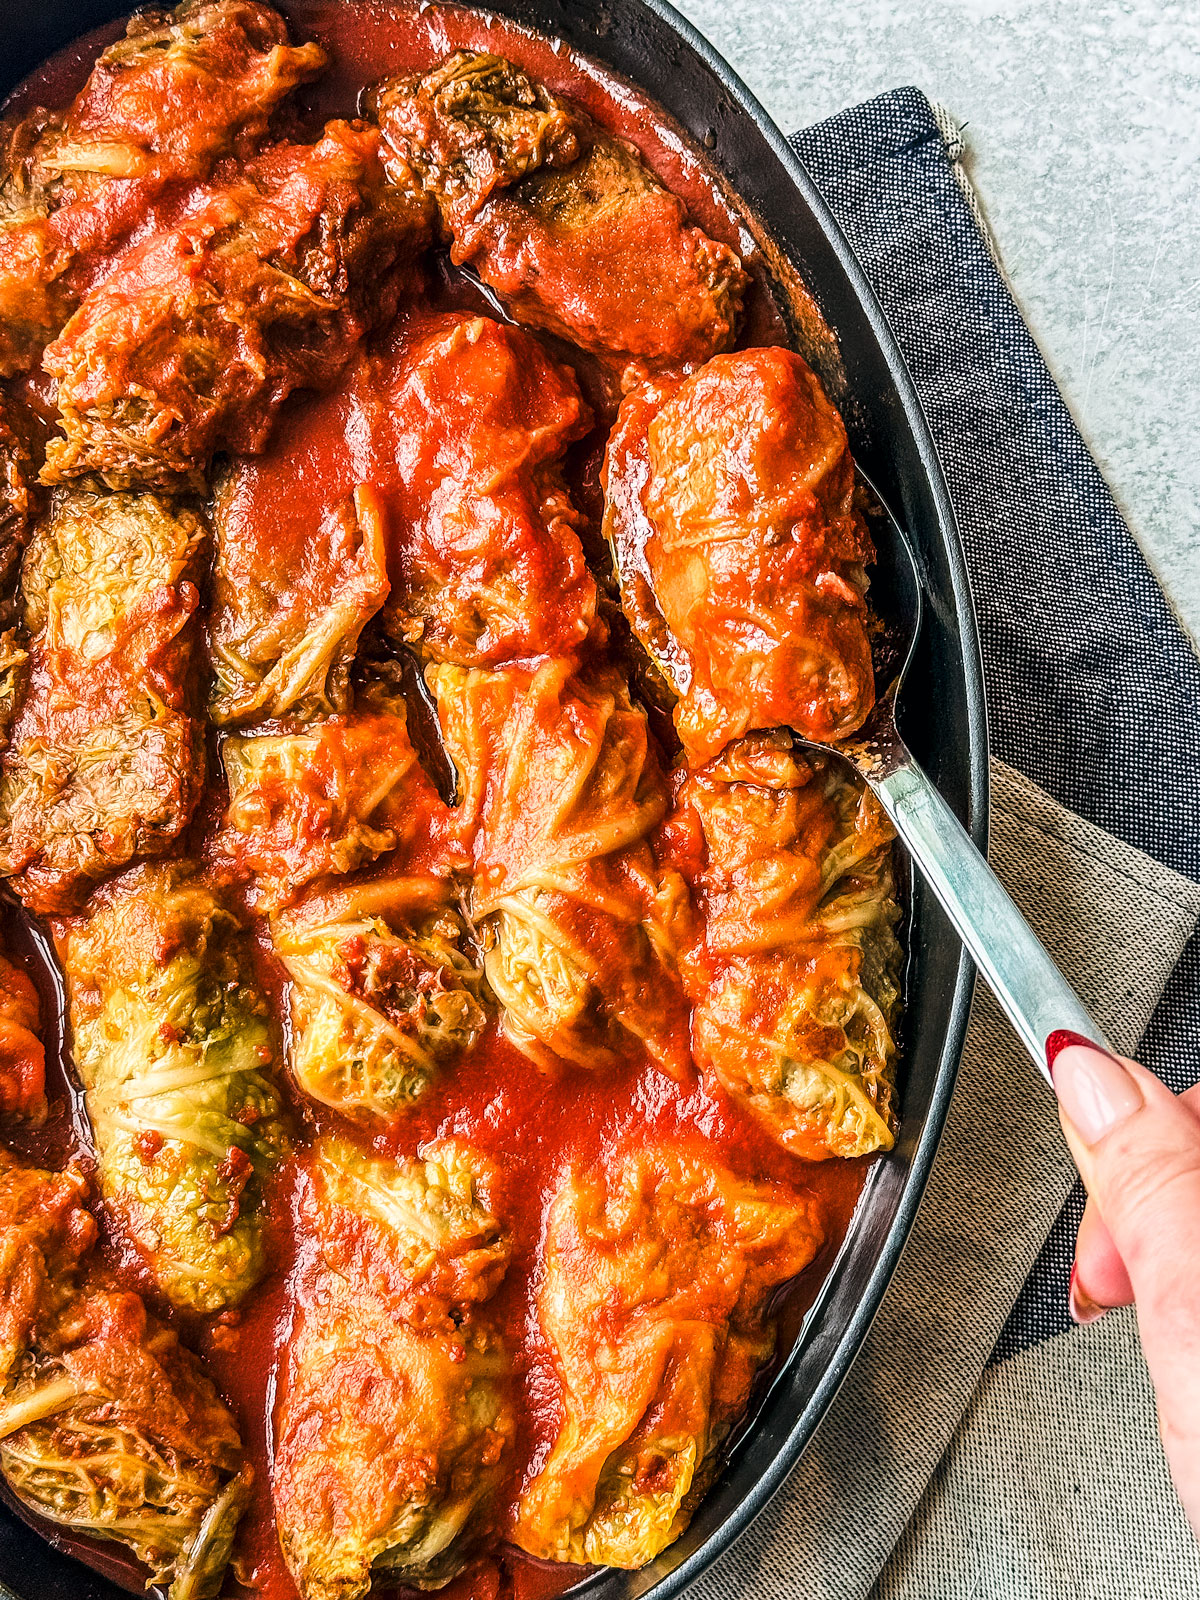 Baking tray of saucy cabbage rolls.